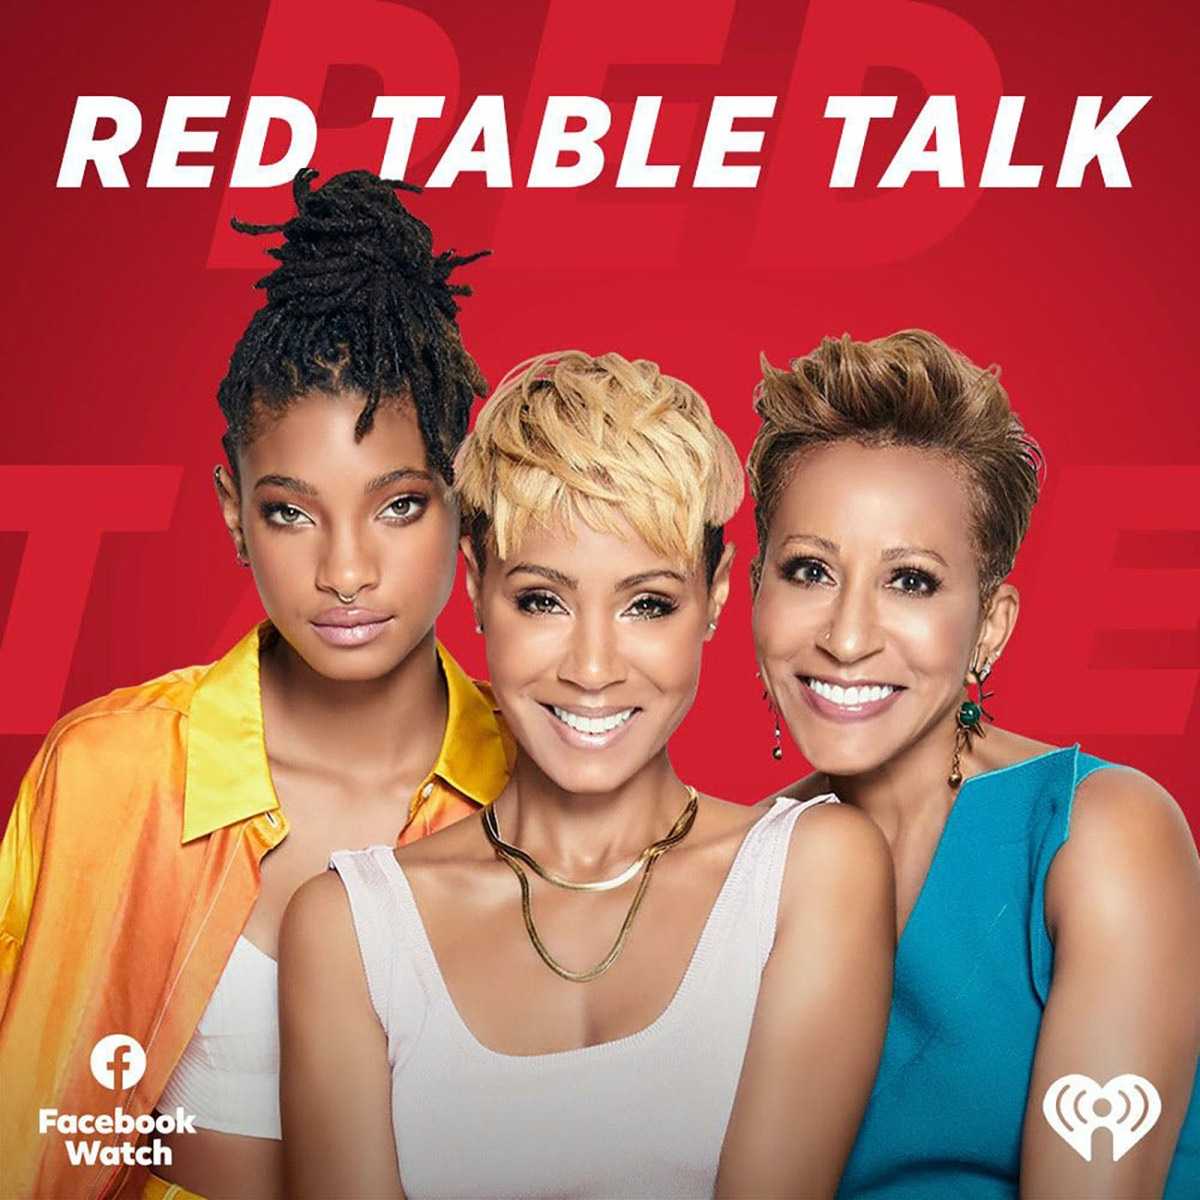 'Black Women...Feel Safe Enough to be Vulnerable': Sheree Zampino's bold stand on Red Table Talk